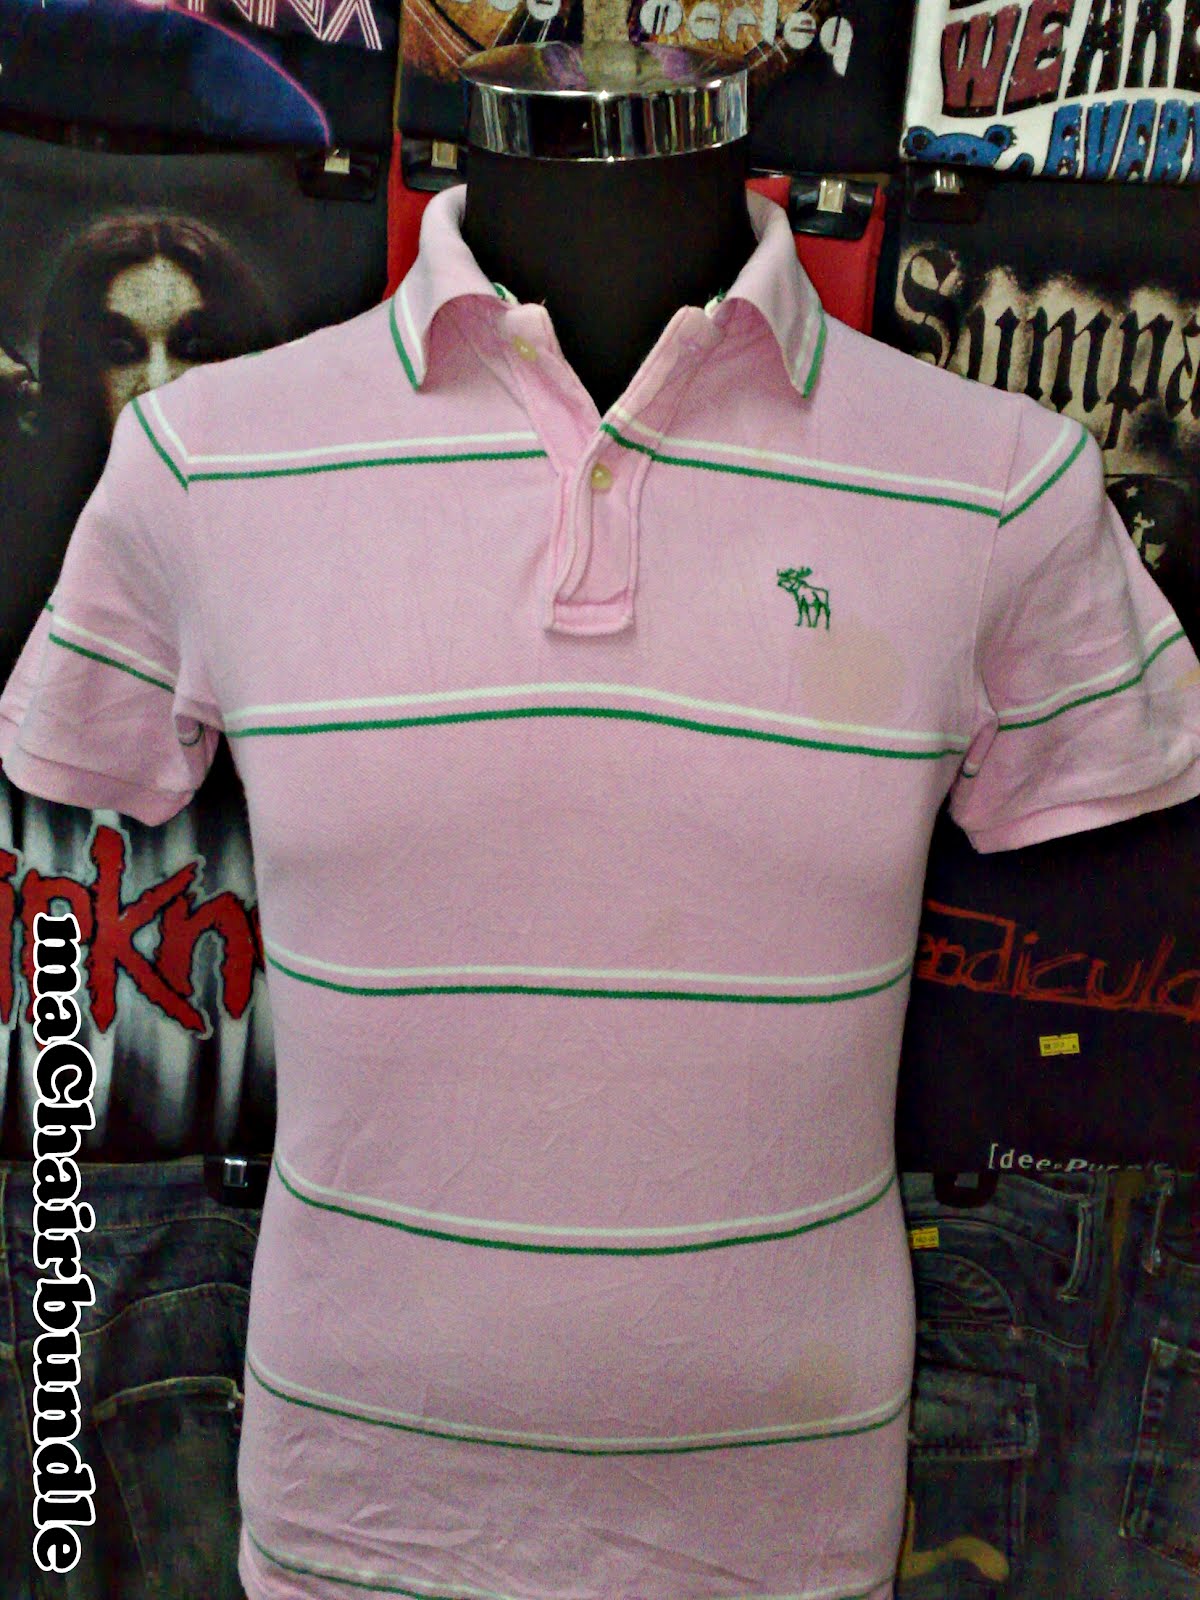 maChairbundle: Abercrombie & Fitch Polo Shirt - RM23 (PG210)